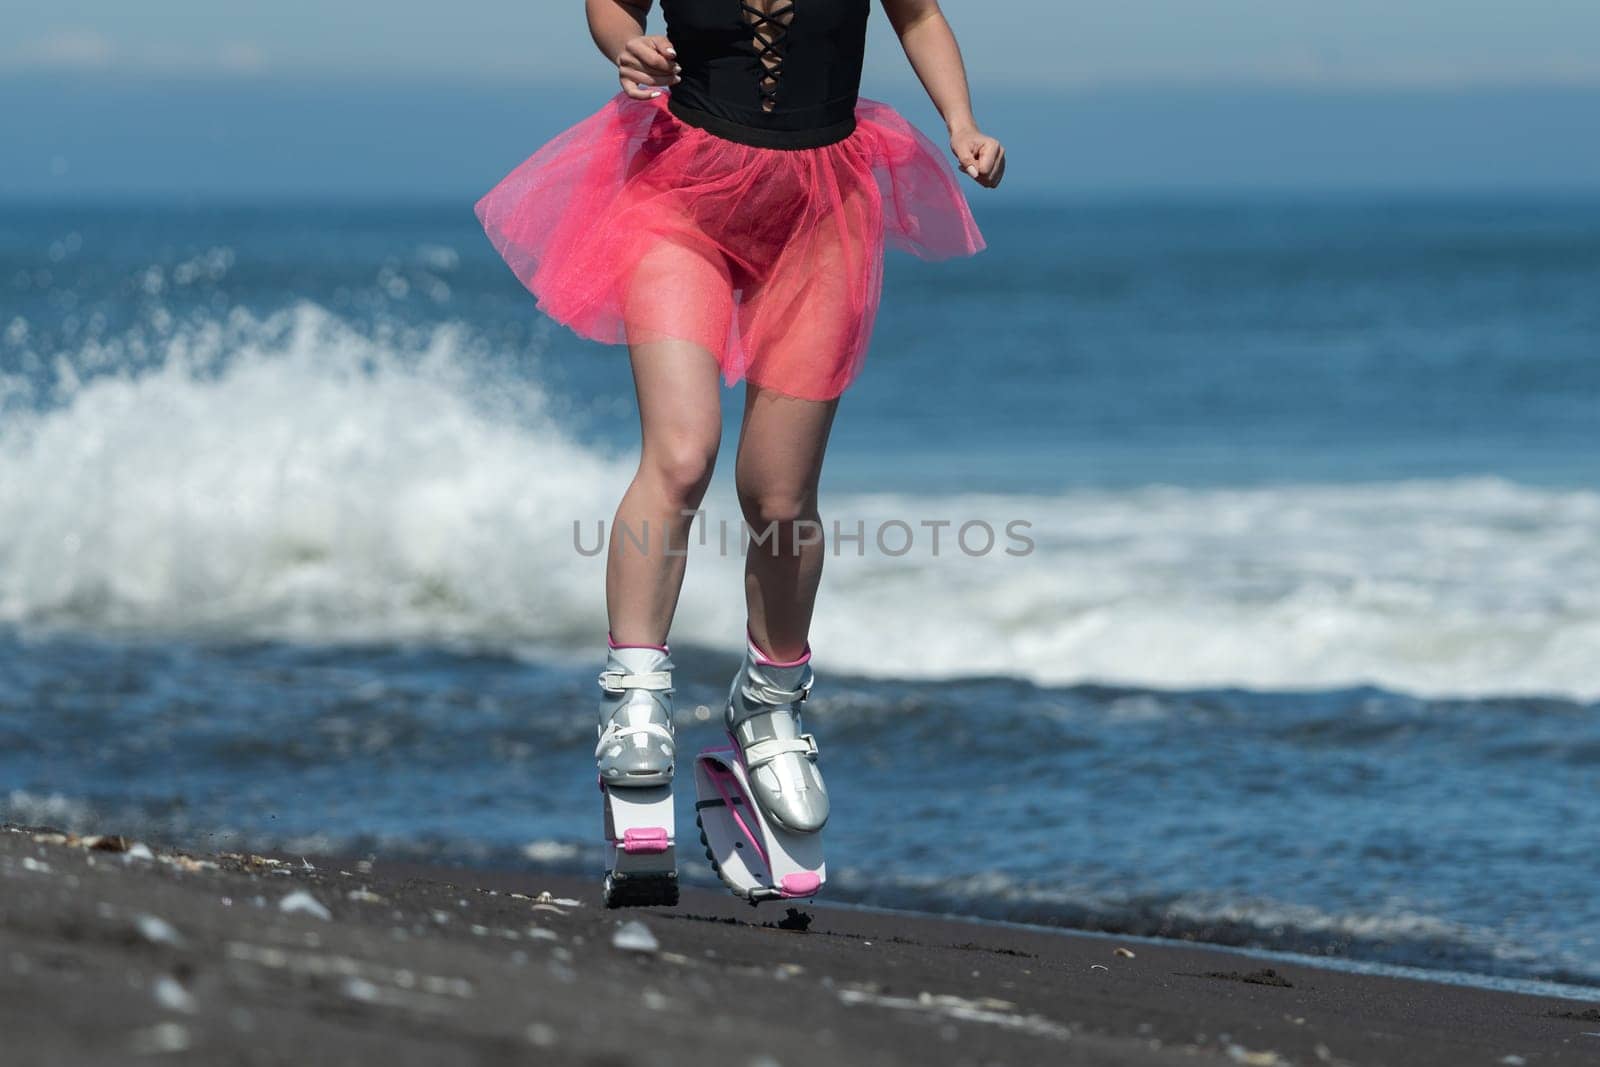 Sportswoman in sports Kangoo Jumps boots, swimsuit and short skirt running and jumping on sandy beach during aerobic session workout by Alexander-Piragis